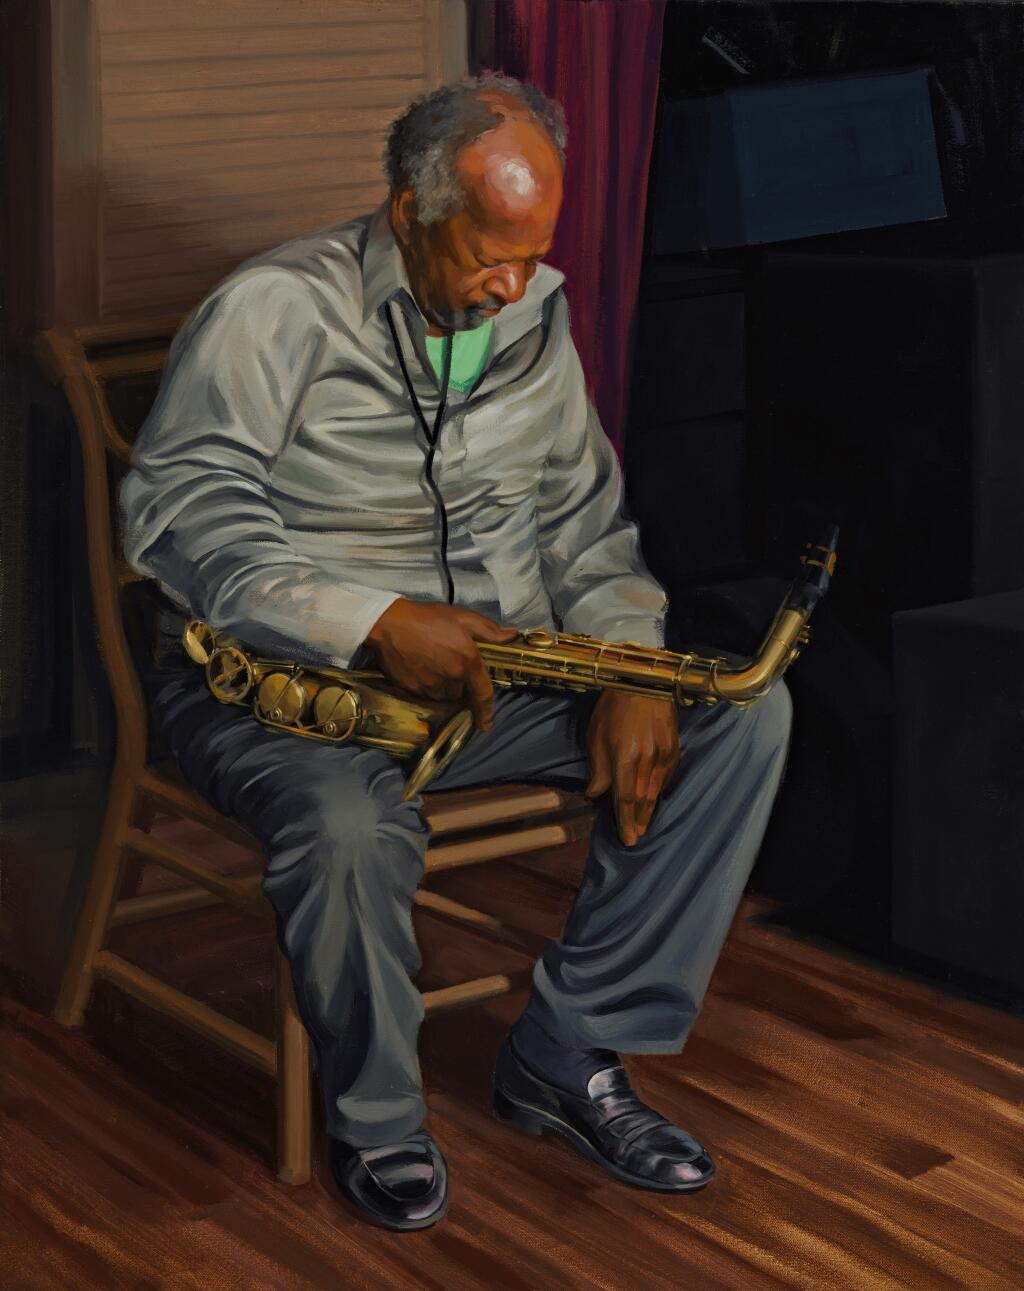 “Bishop Norman Williams” by Lewis Bangham, oil on canvas, 2017. Bangham is one of 90 artists participating in this year’s Art at the Source open studio tours. (Photo: Lewis Bangham.)